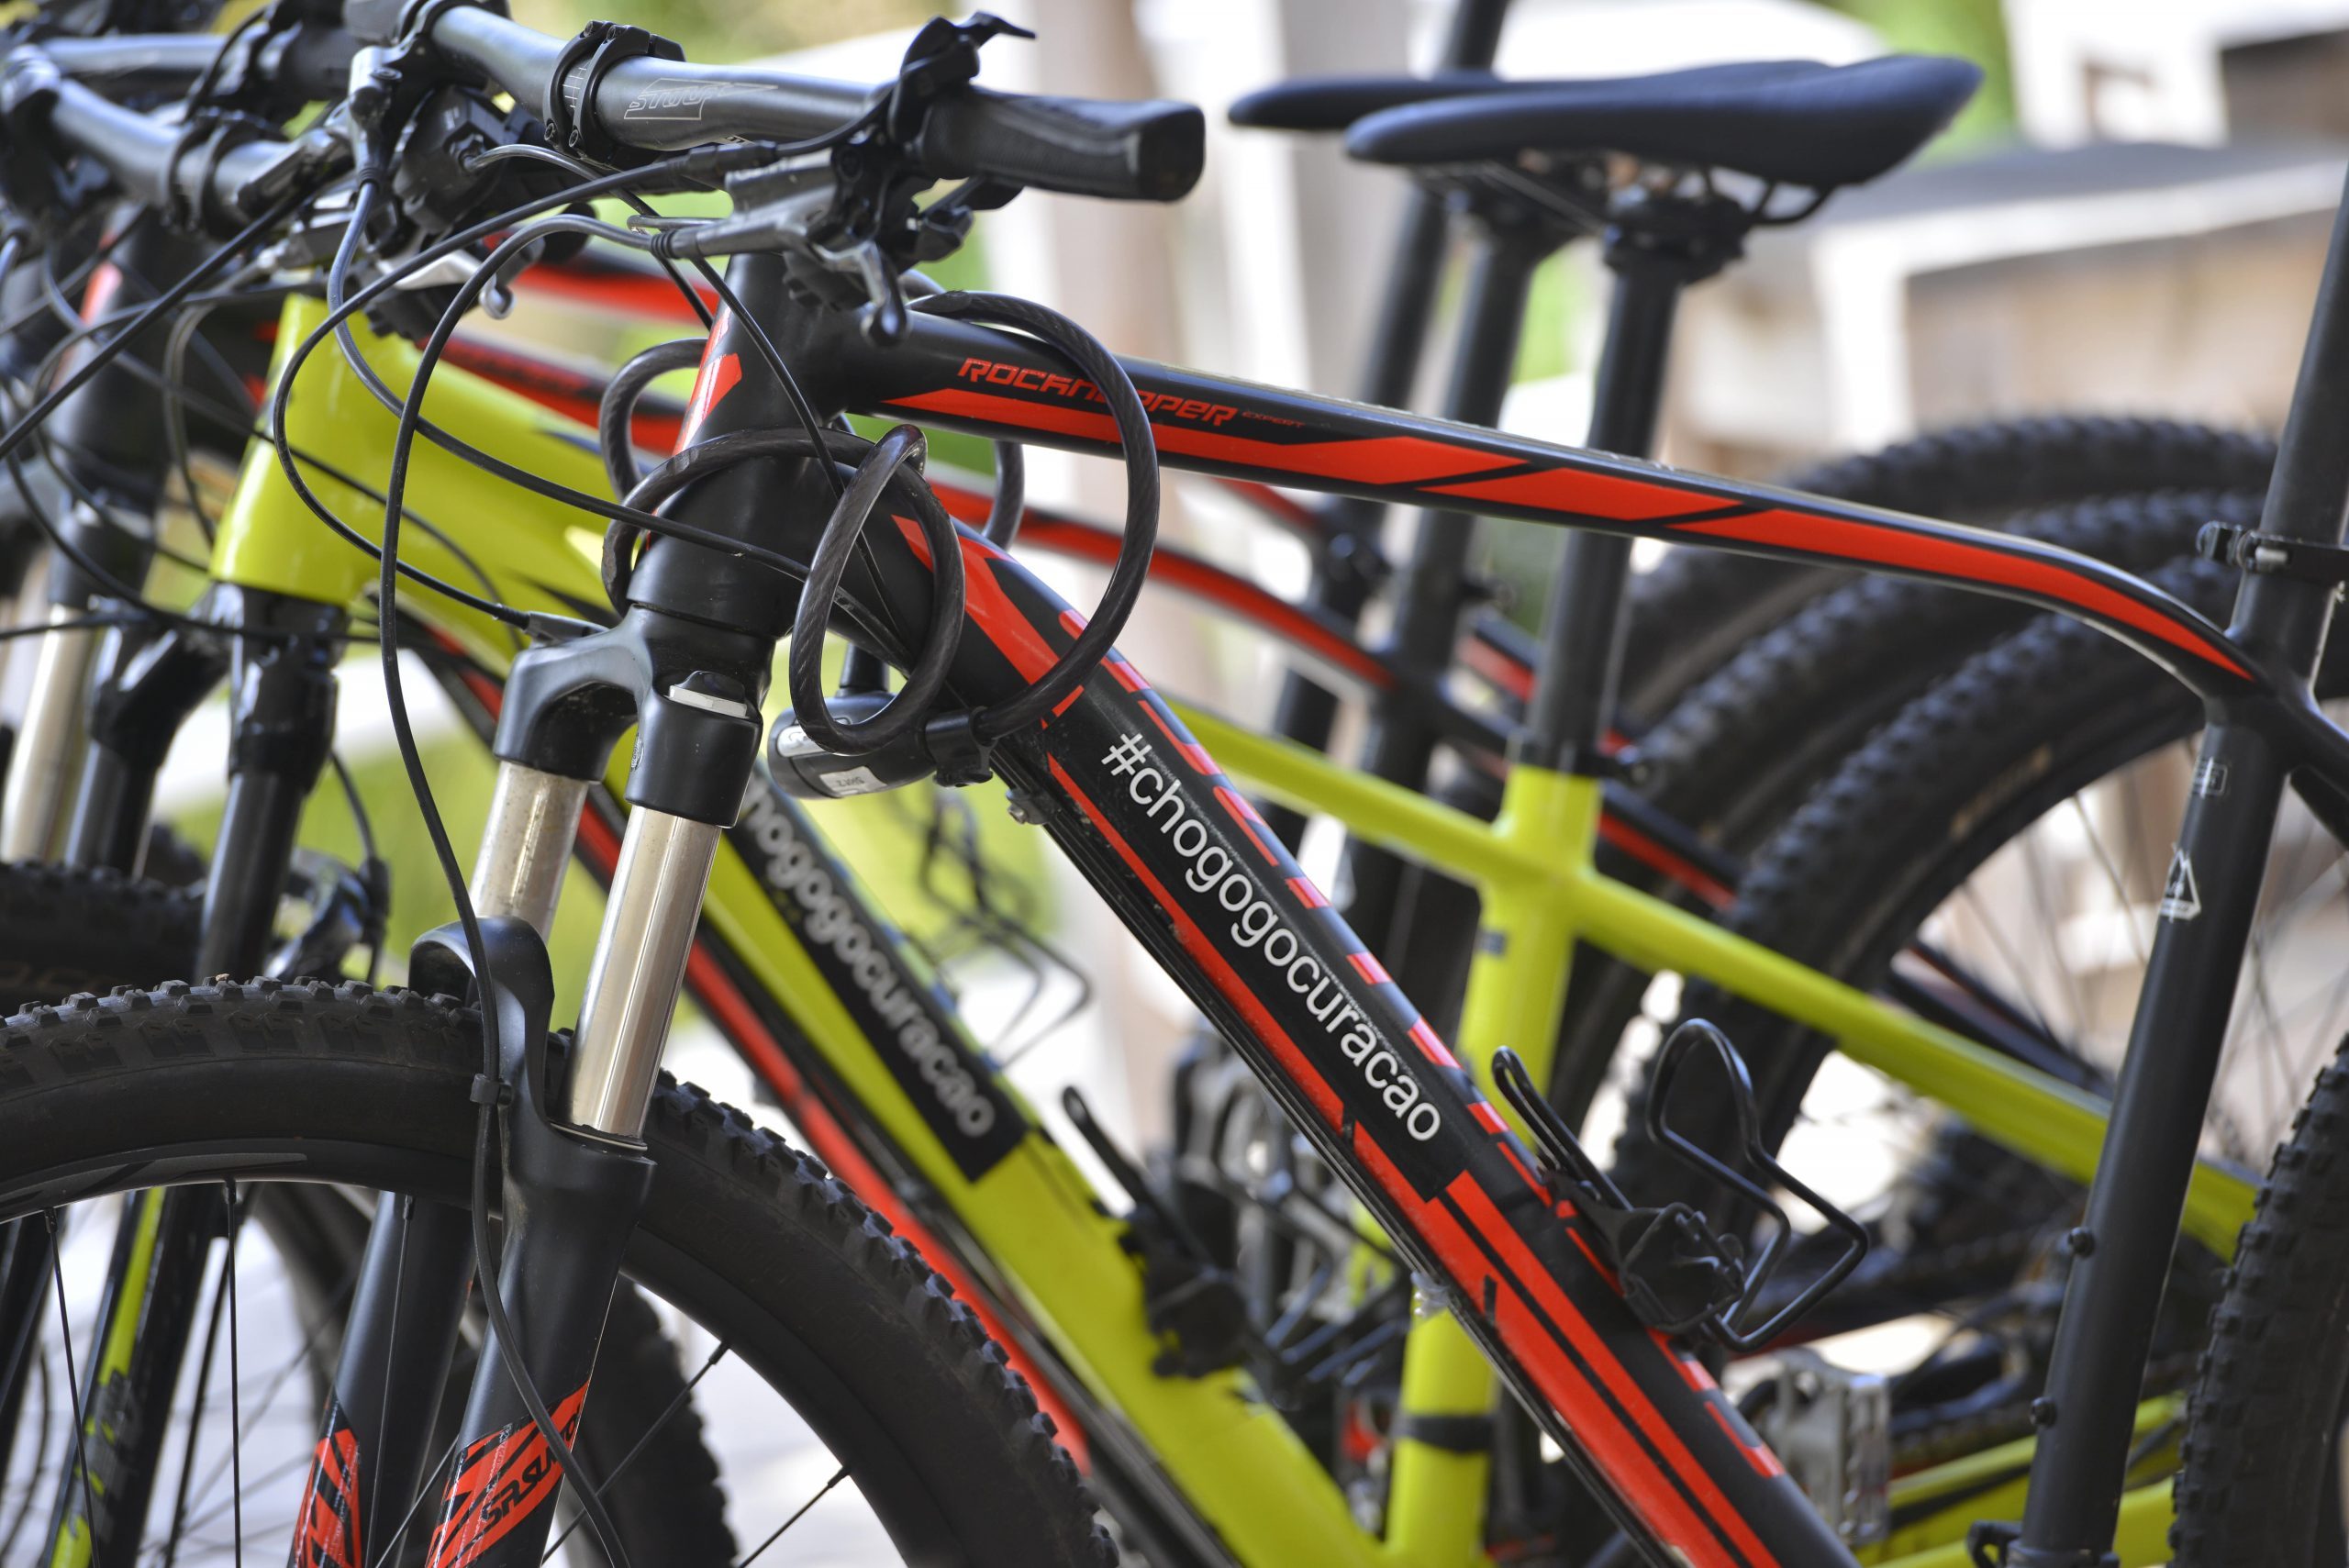 High quality mountain bikes for rent at the Chogogo bike rental.